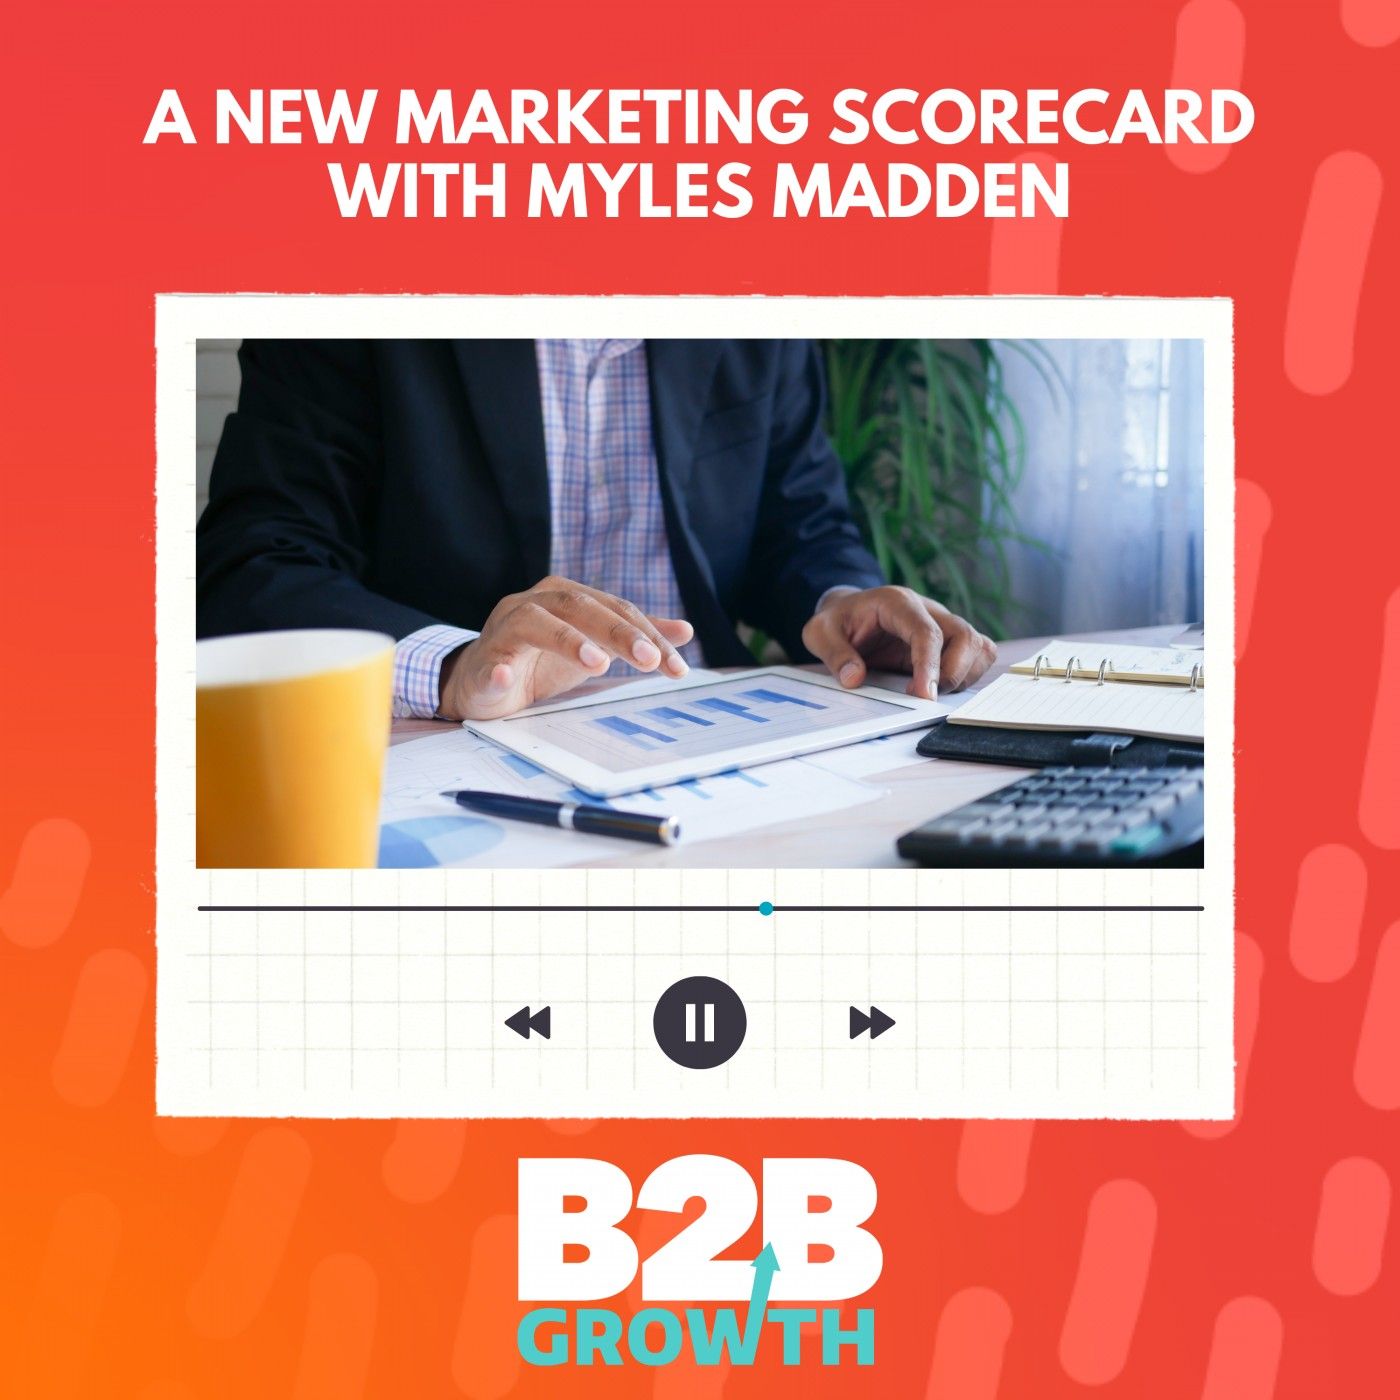 It’s Time for a New Marketing Scorecard, with Myles Madden